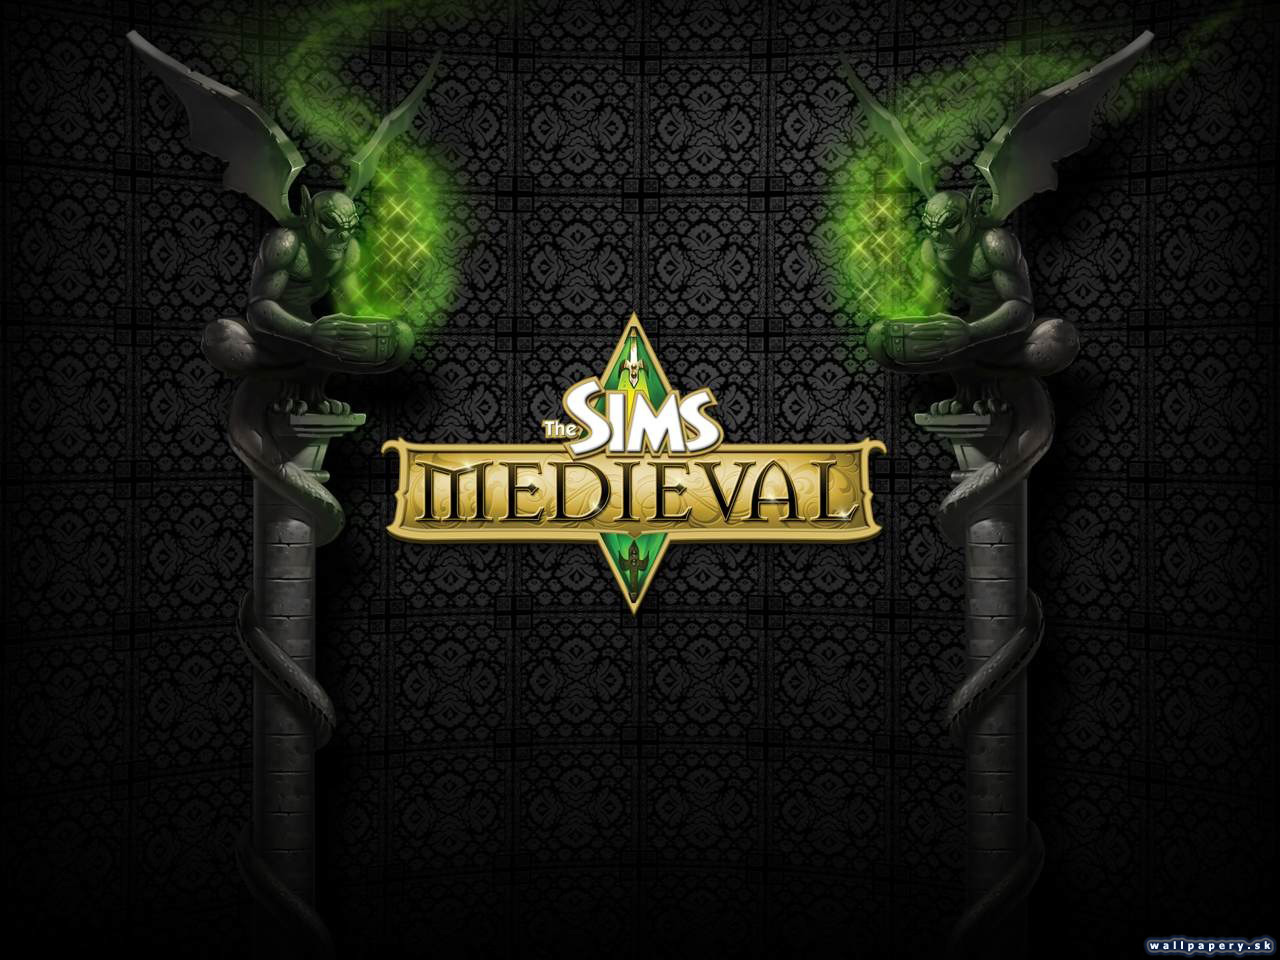 The Sims Medieval - wallpaper 6